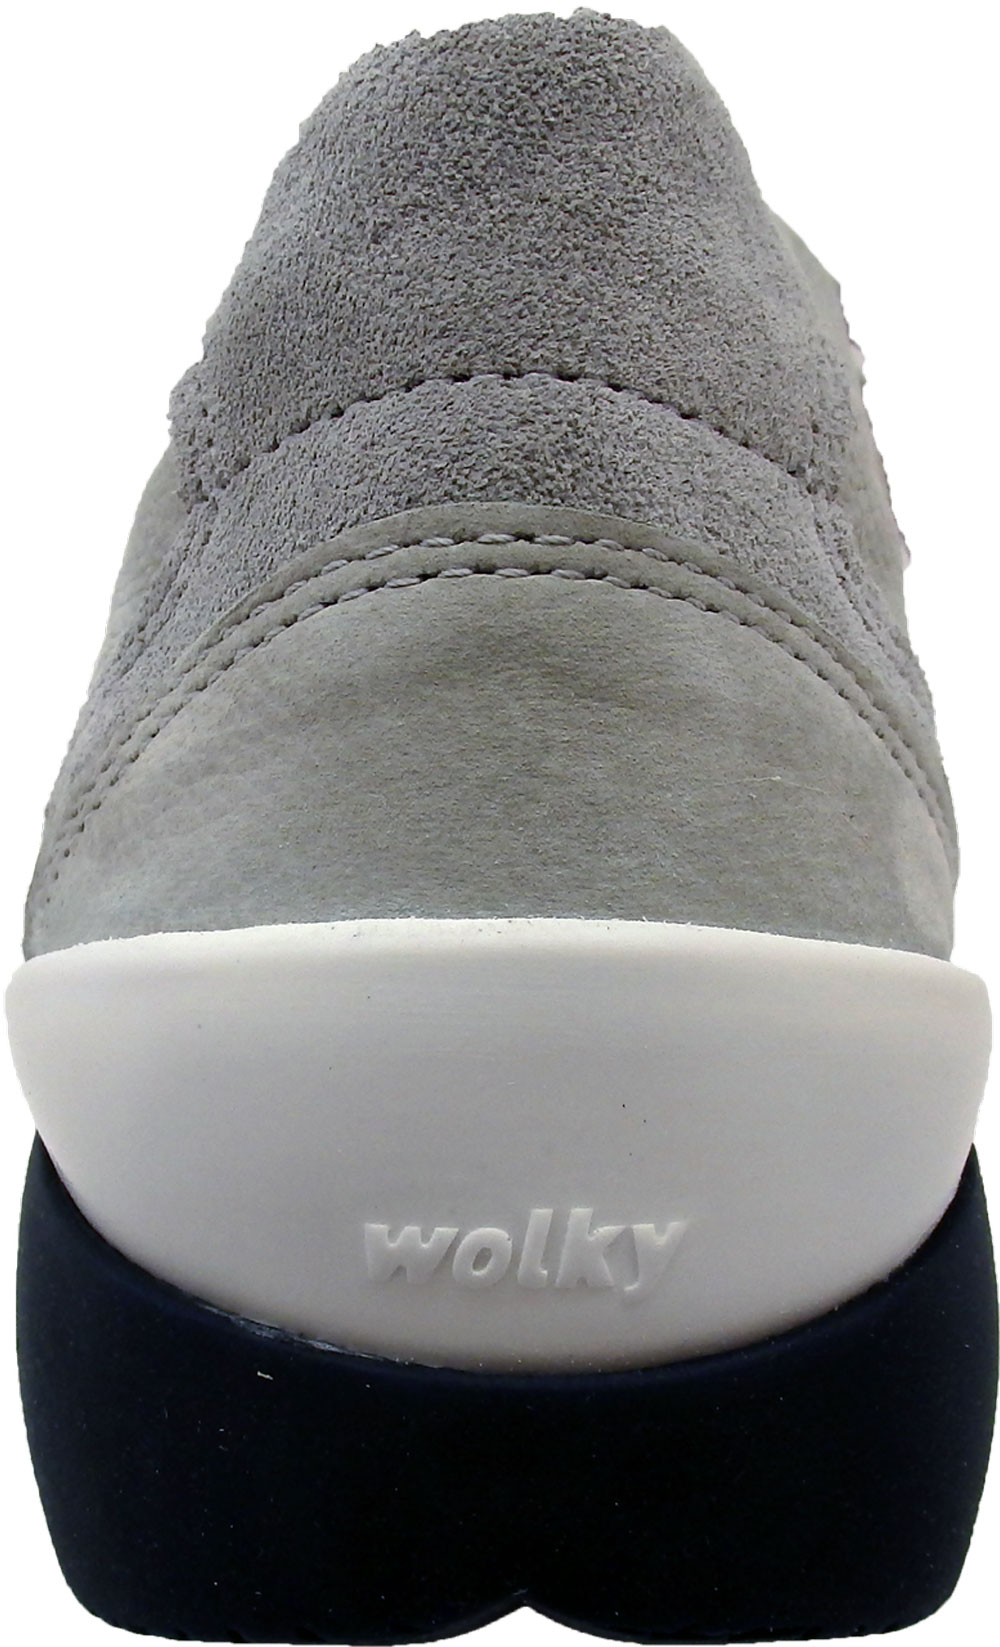 Wolky Halbschuh Time antique Nubuk light grey